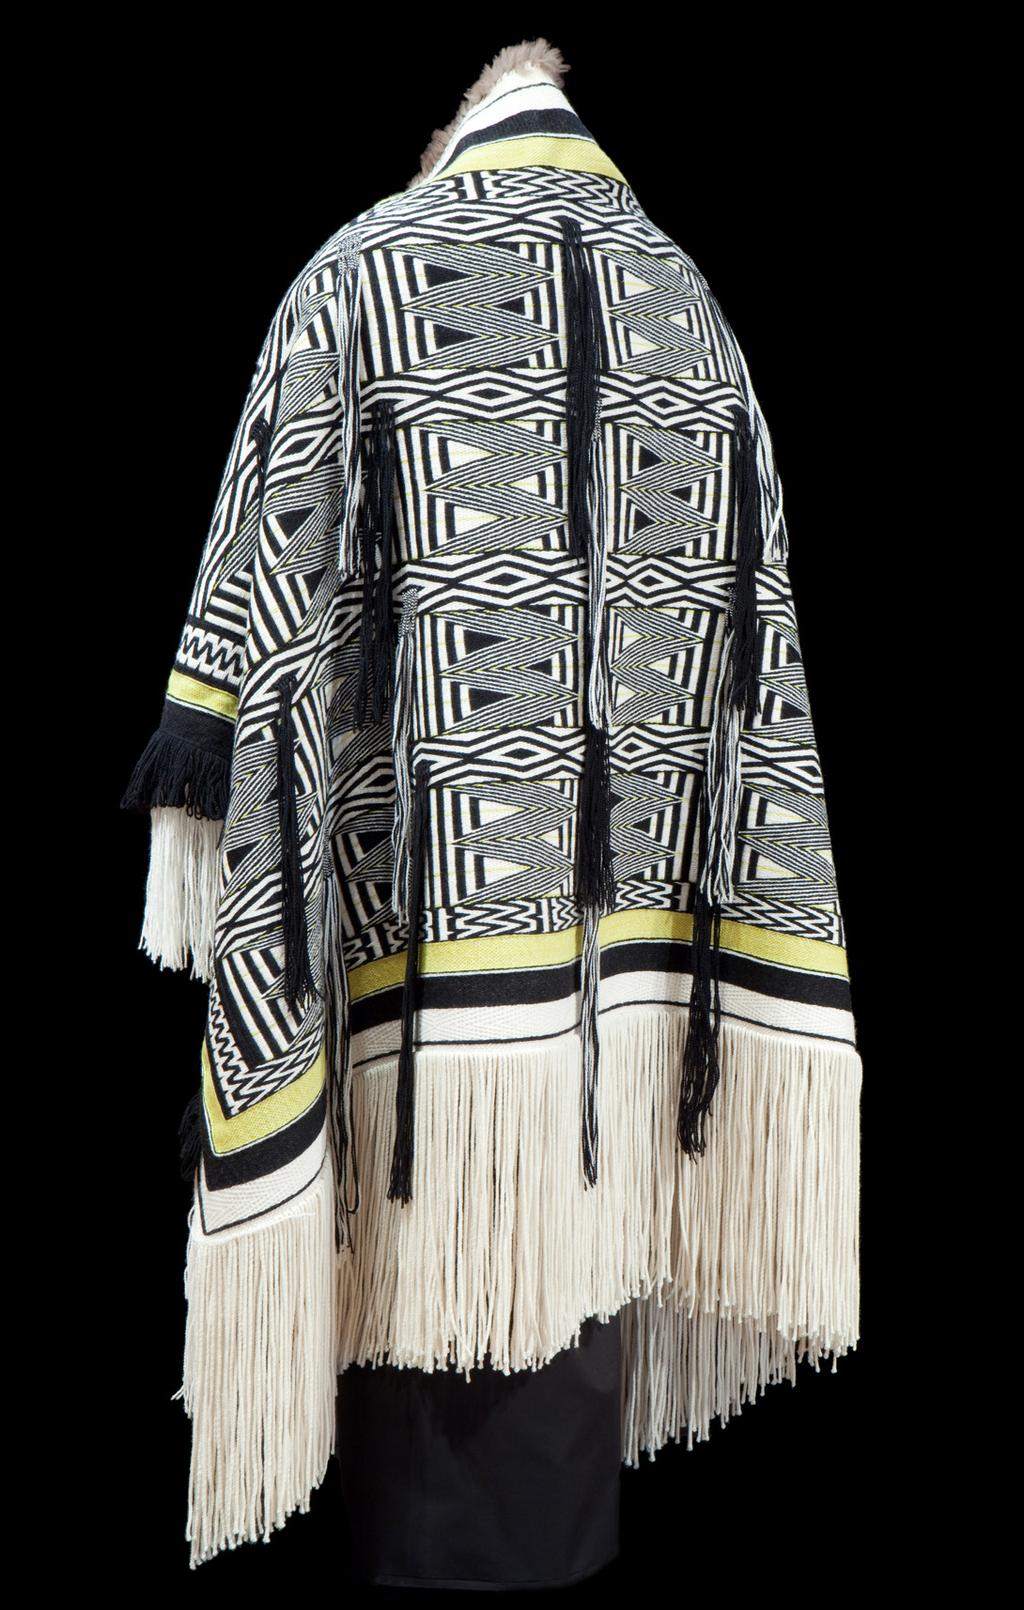 Ainu Artist, Sanae Ogawa NAT I V E A M E R I CA N S OF T H E PAC I F I C NORT H W E S T The Northwest Coast ceremonial robes featured in this exhibition were